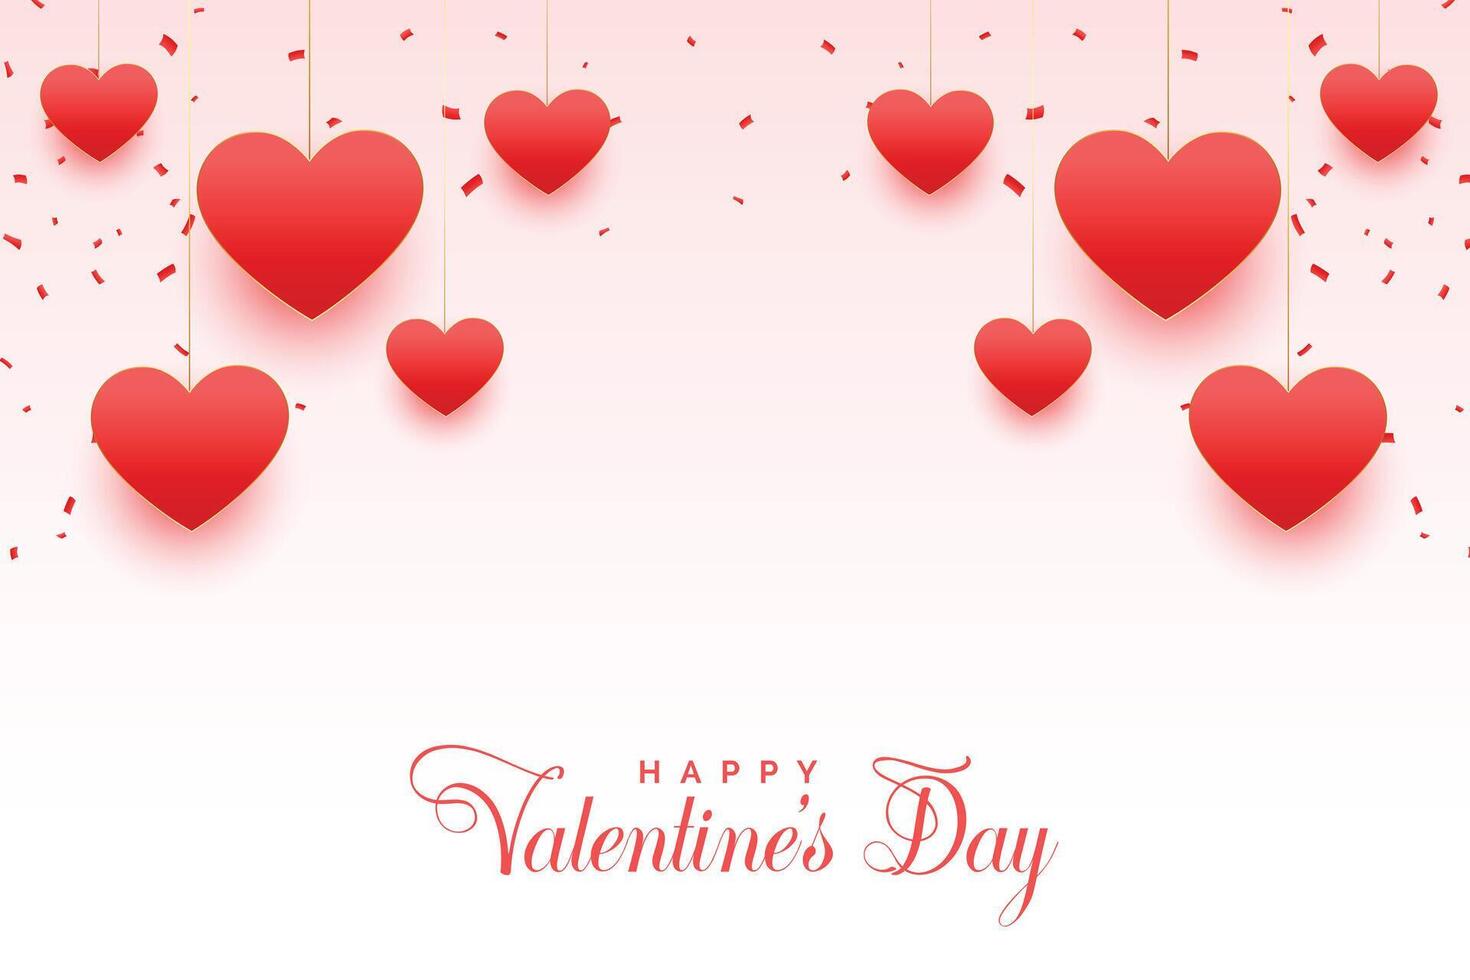 happy valentines day beautiful hearts background design vector